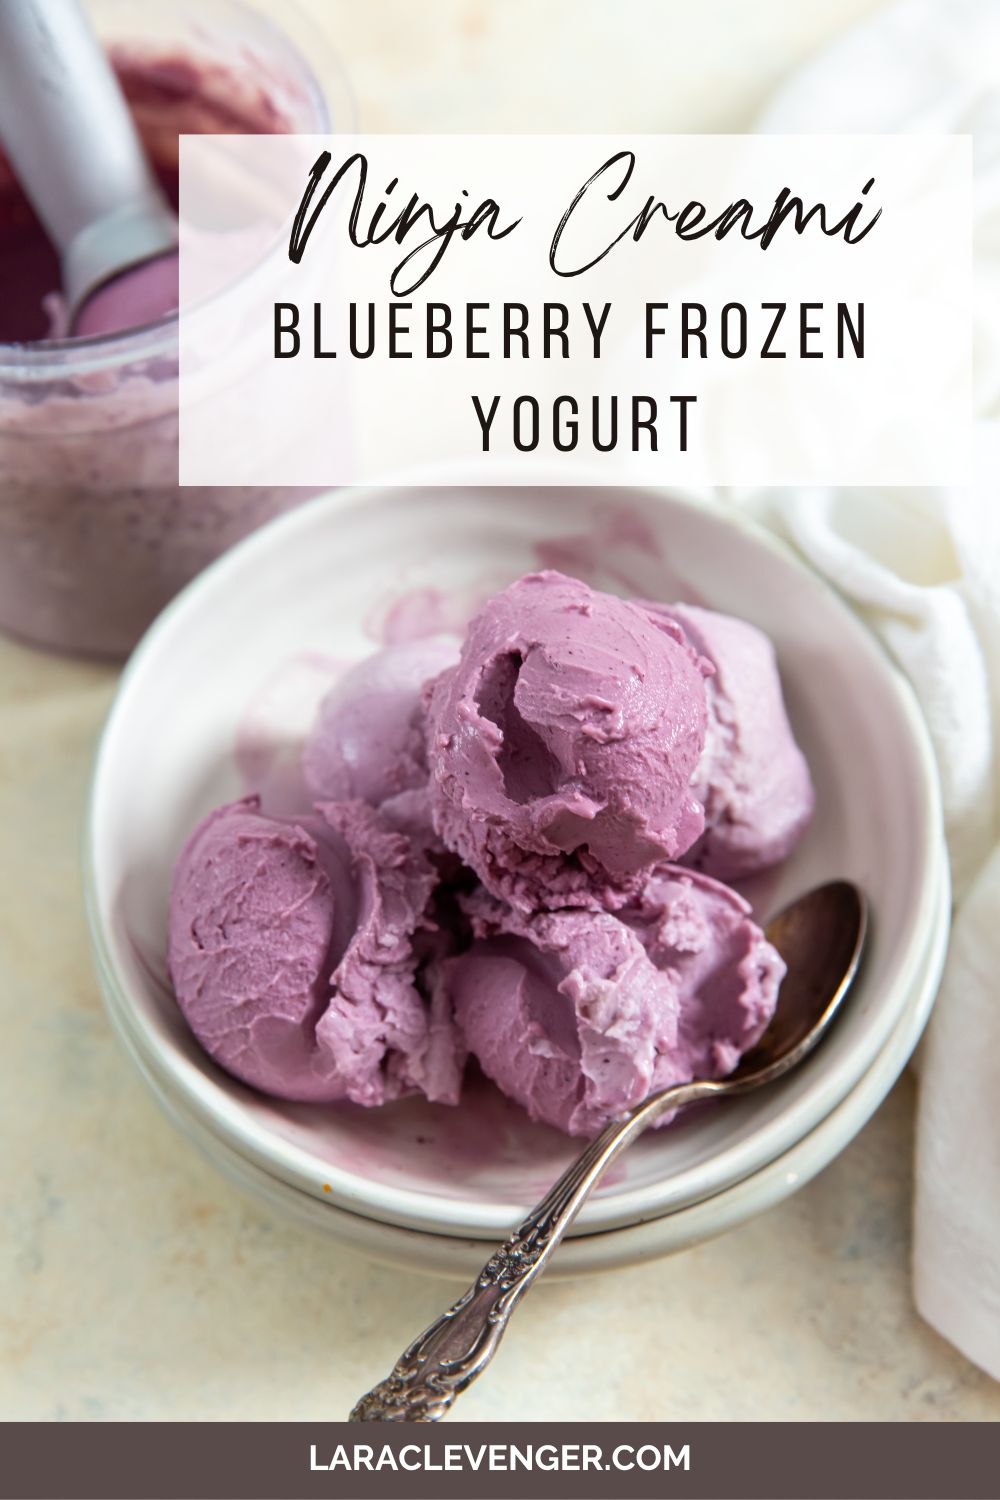 pin of ninja creami low carb blueberry frozen yogurt in a bowl with a spoon and white napkin